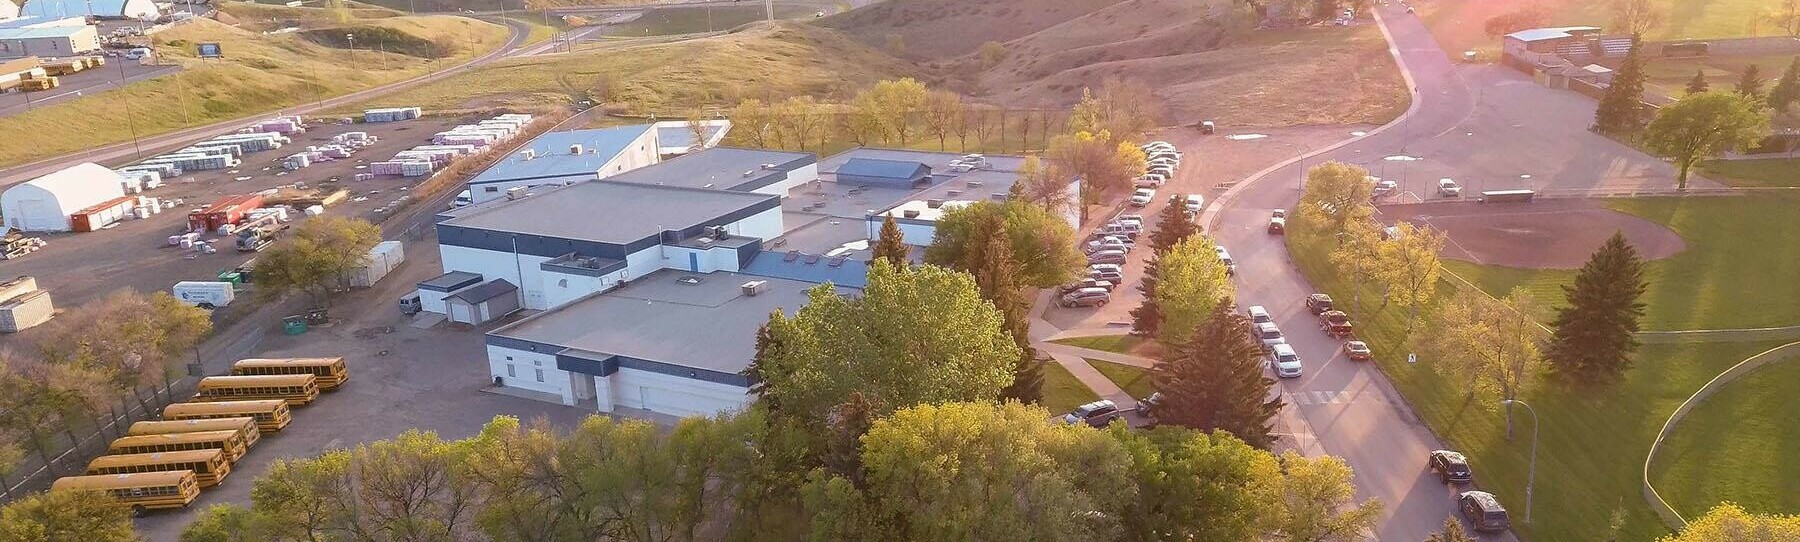 ICSS building drone aerial photo sunset coulees building busses